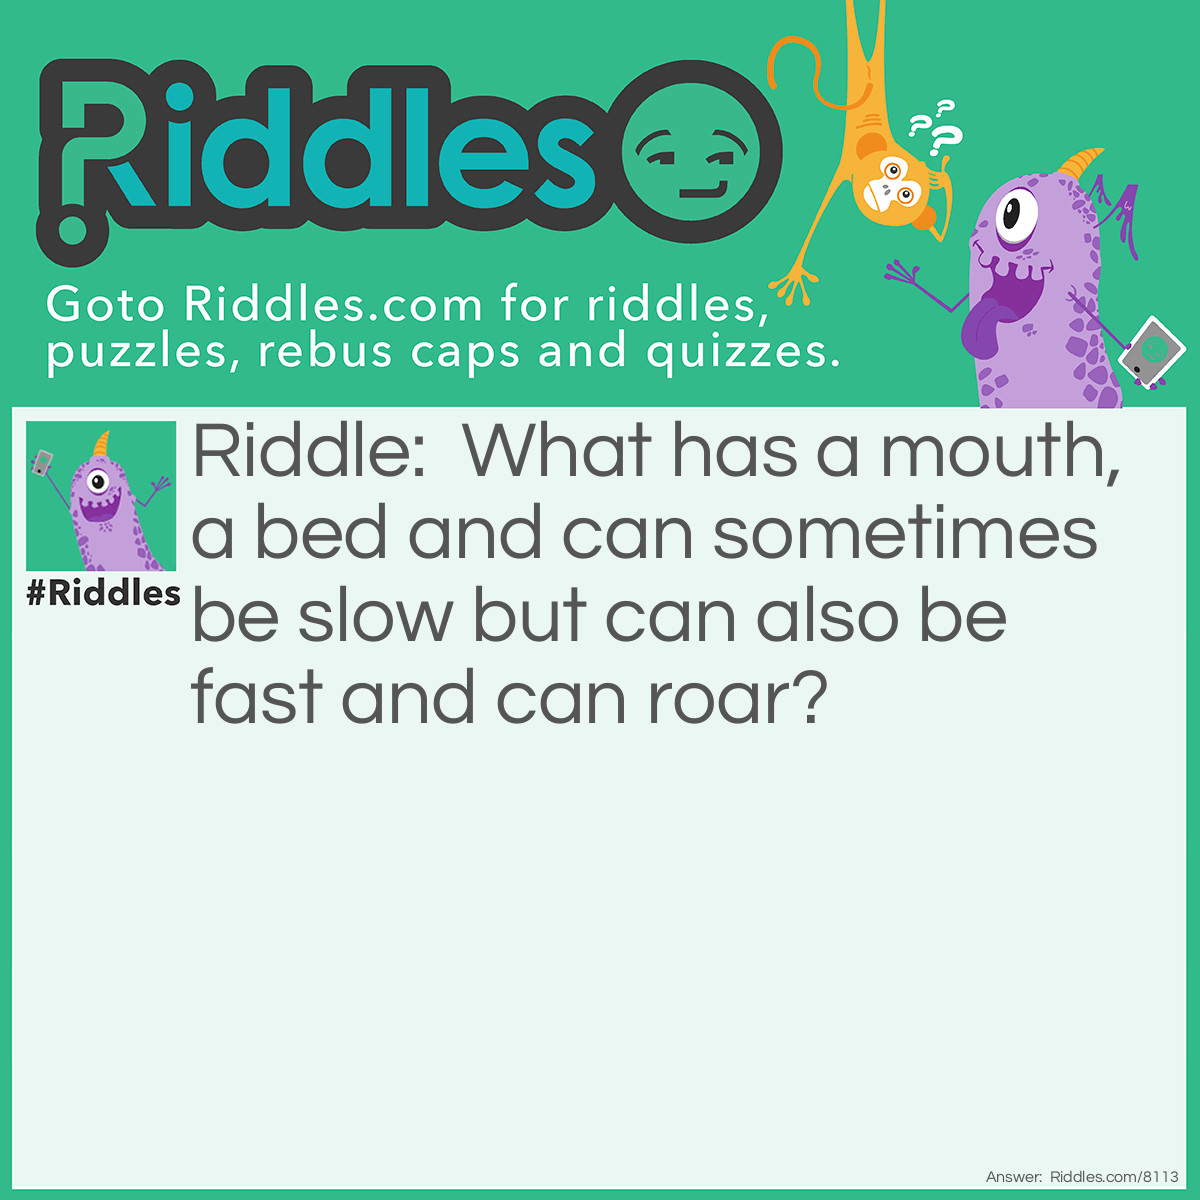 Riddle: What has a mouth, a bed and can sometimes be slow but can also be fast and can roar? Answer: A river.